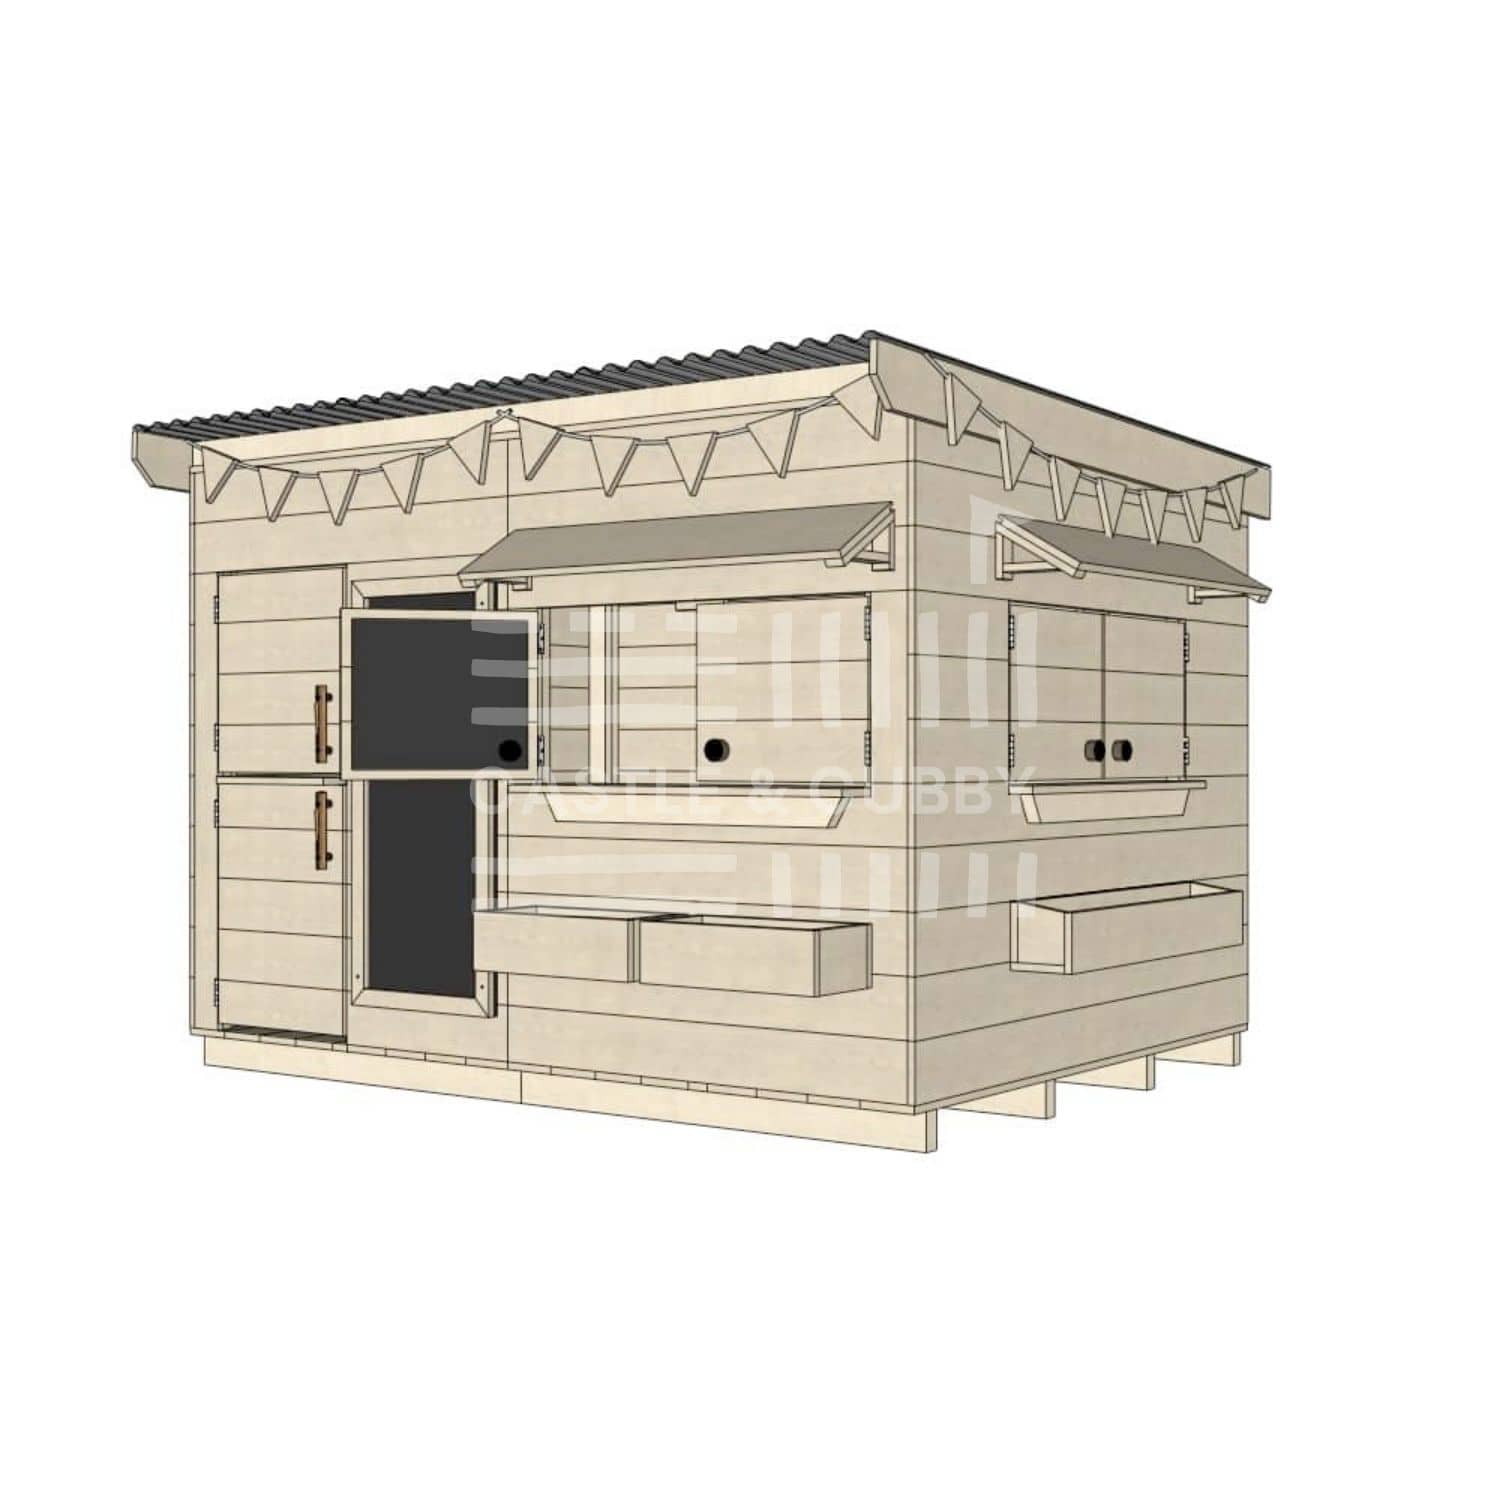 Flat roof raw wooden cubby house family backyard large rectangle size with accessories